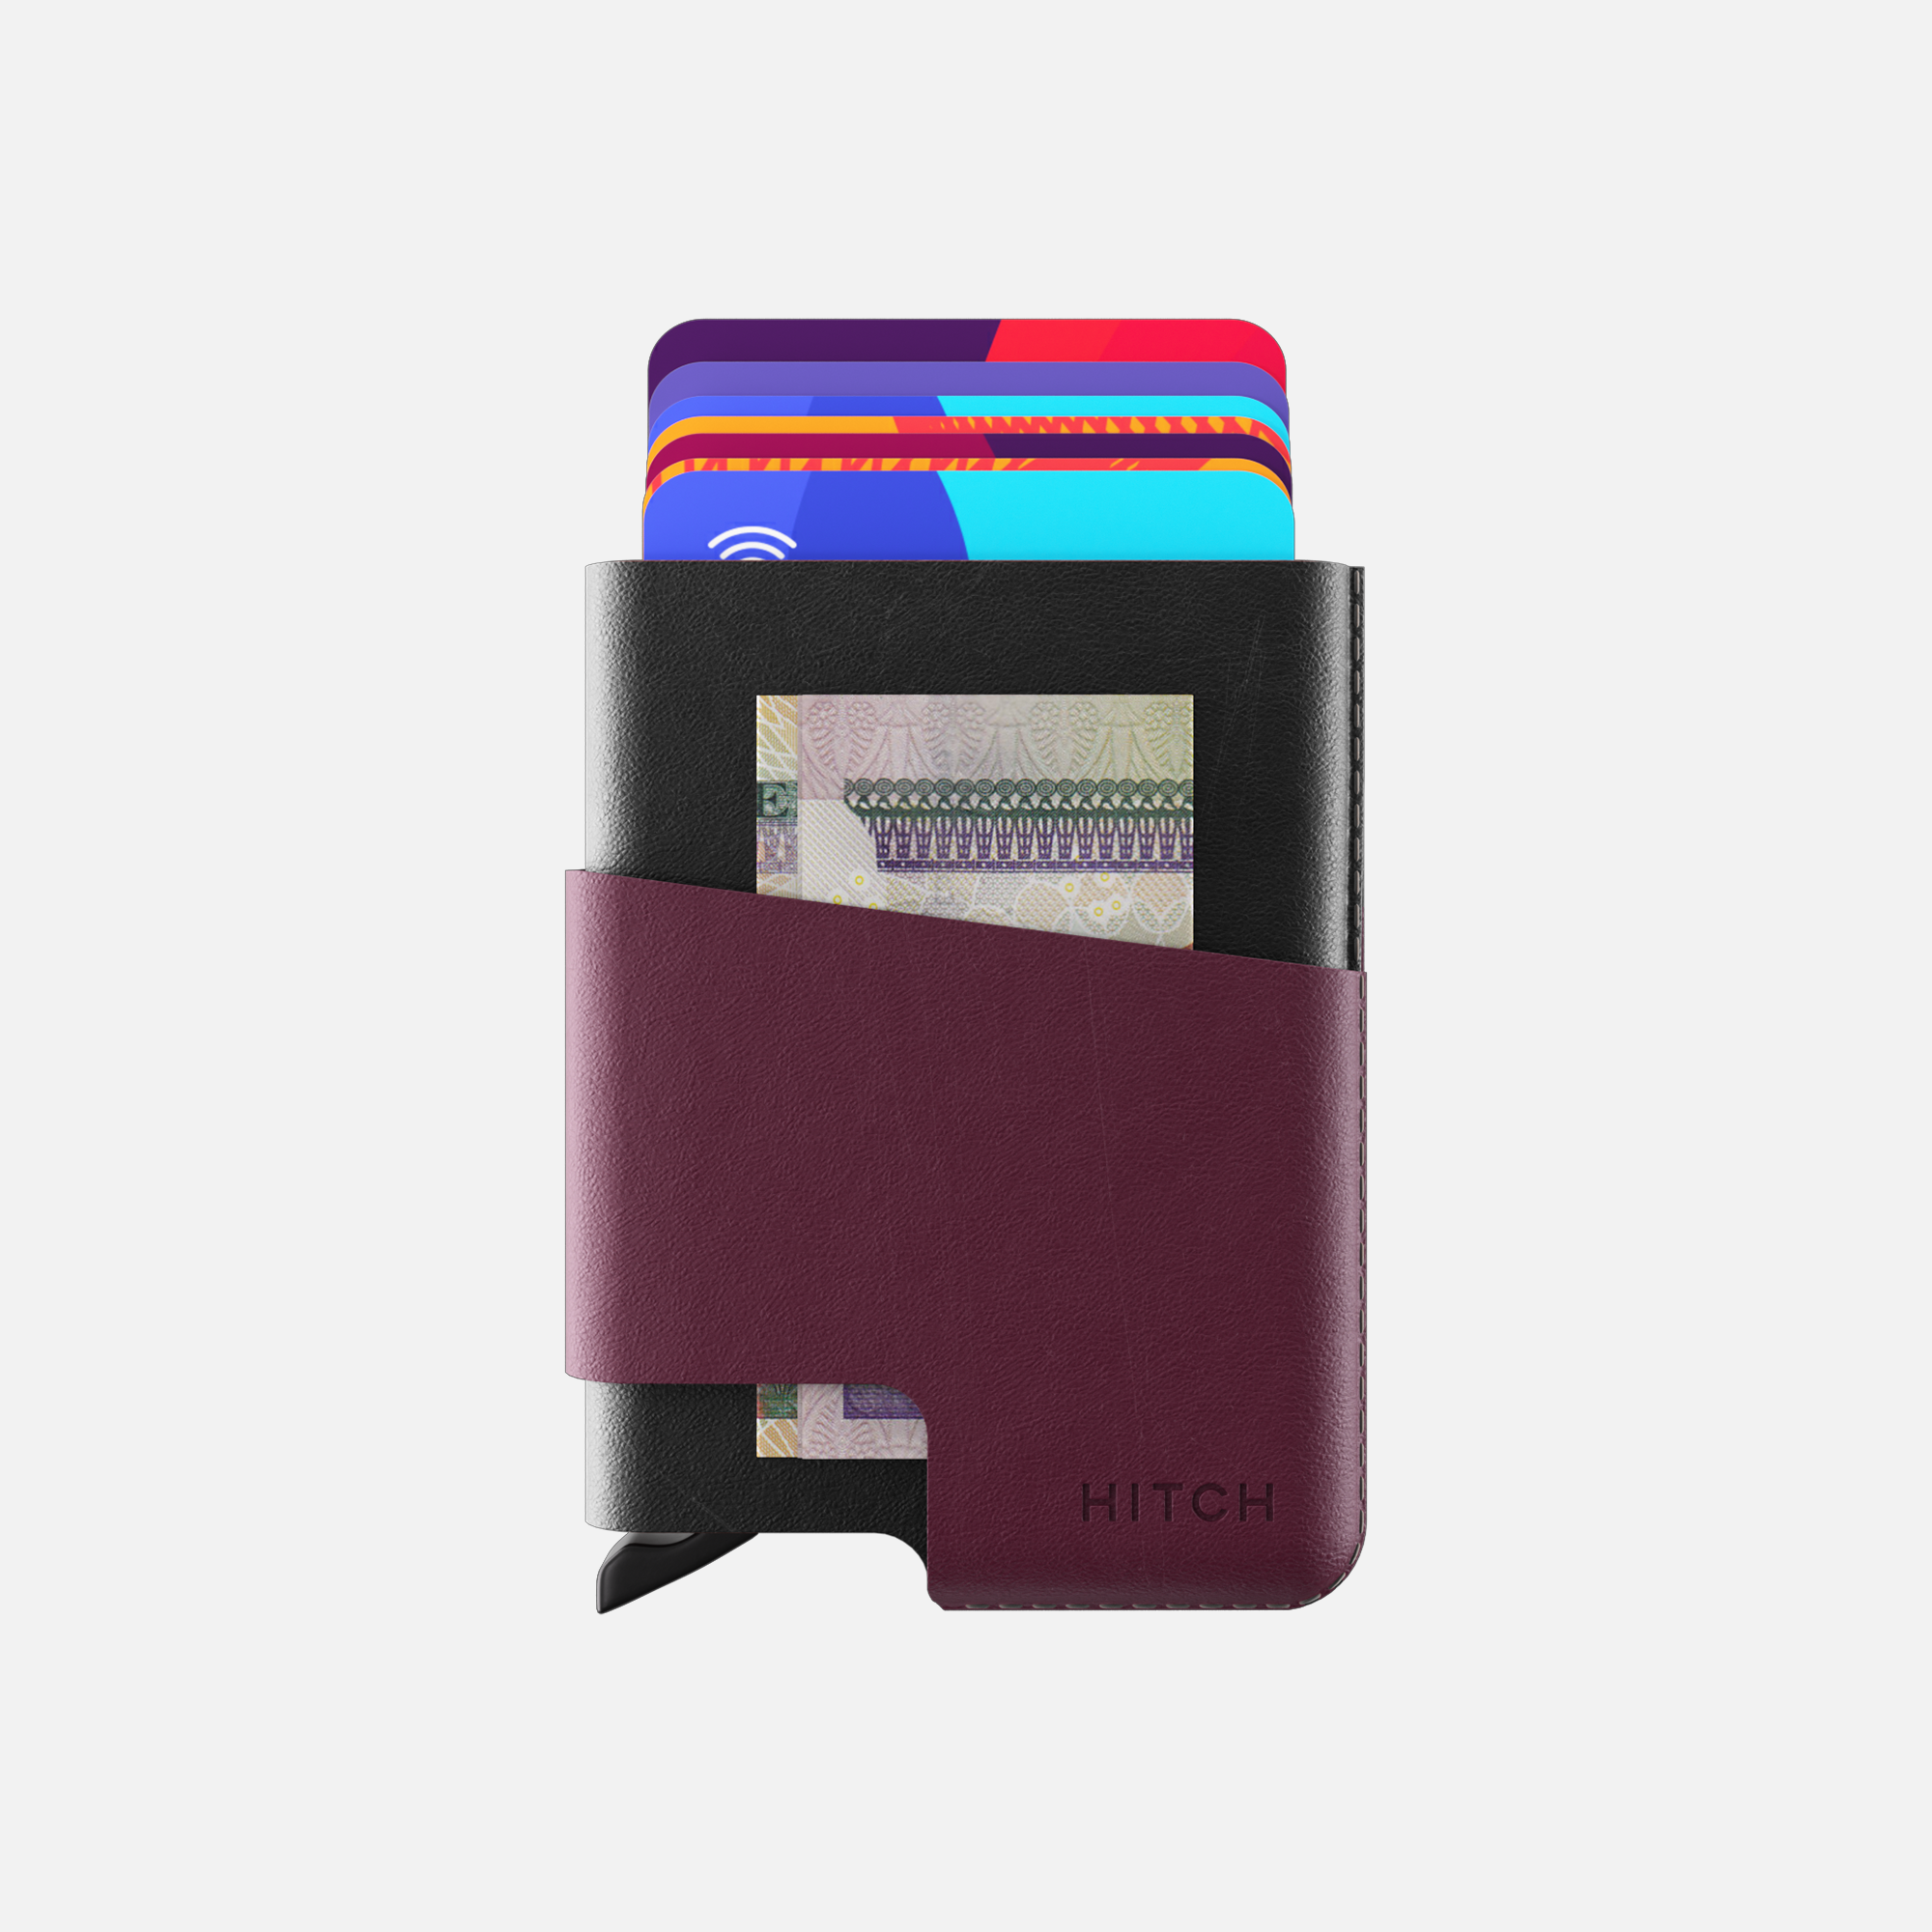 Purple and black leather cardholder wallet with cards and cash on white background.